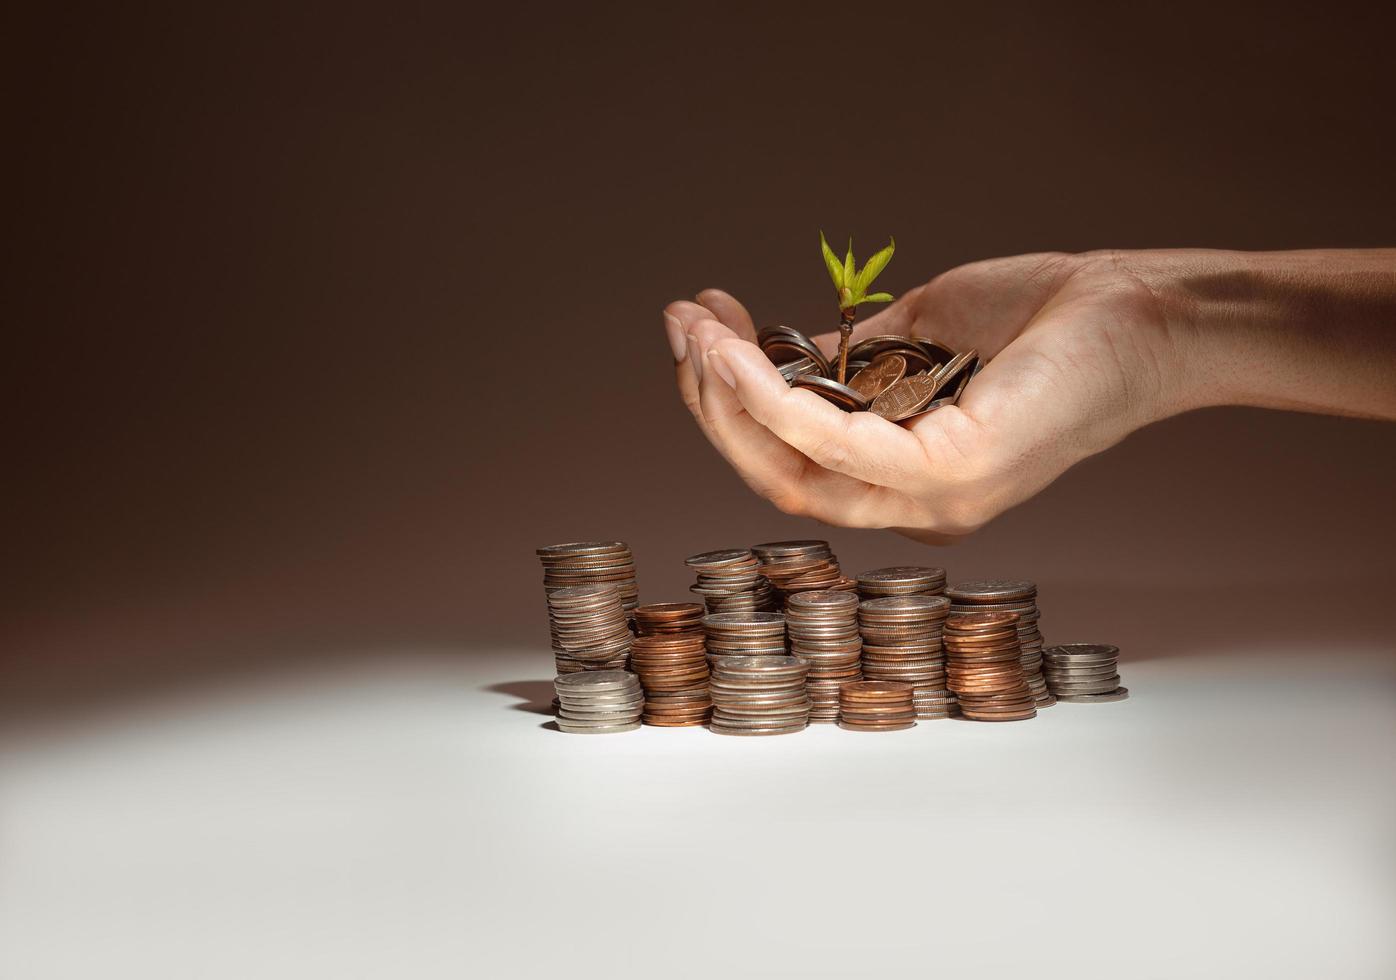 plant growing from coins and a hand holding coins with a stack of coins photo